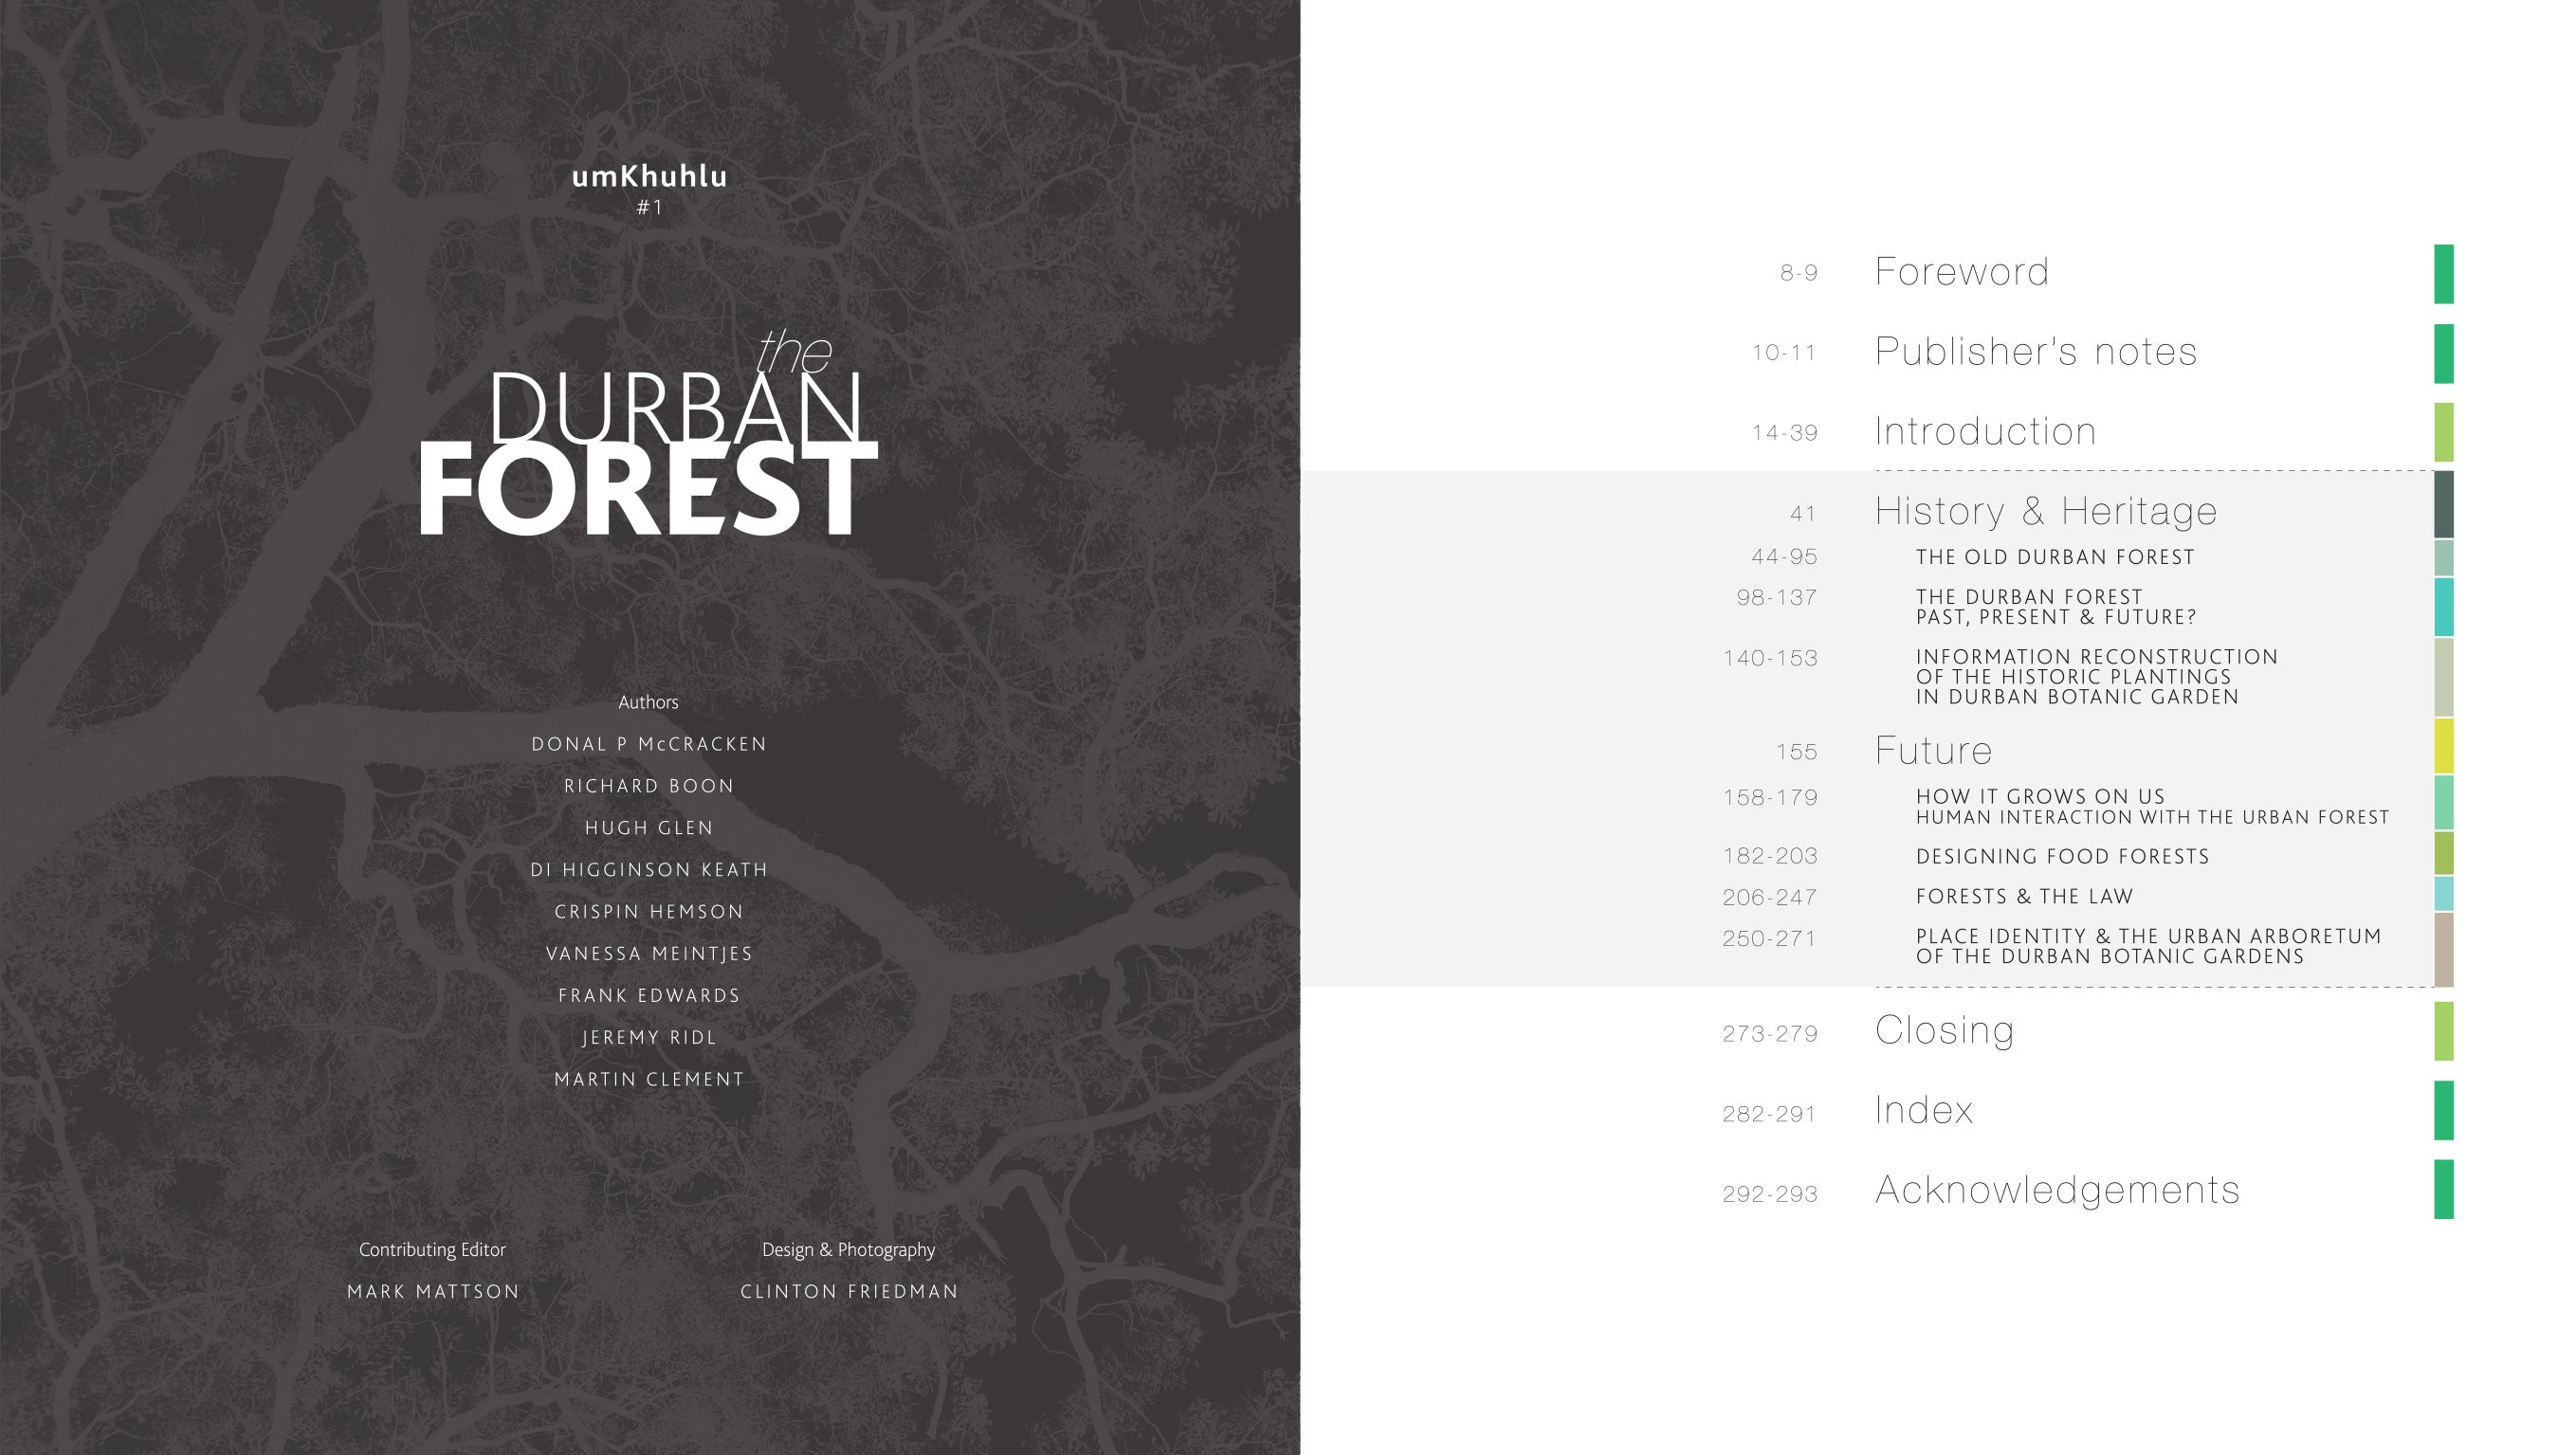 The Durban Forest 2015